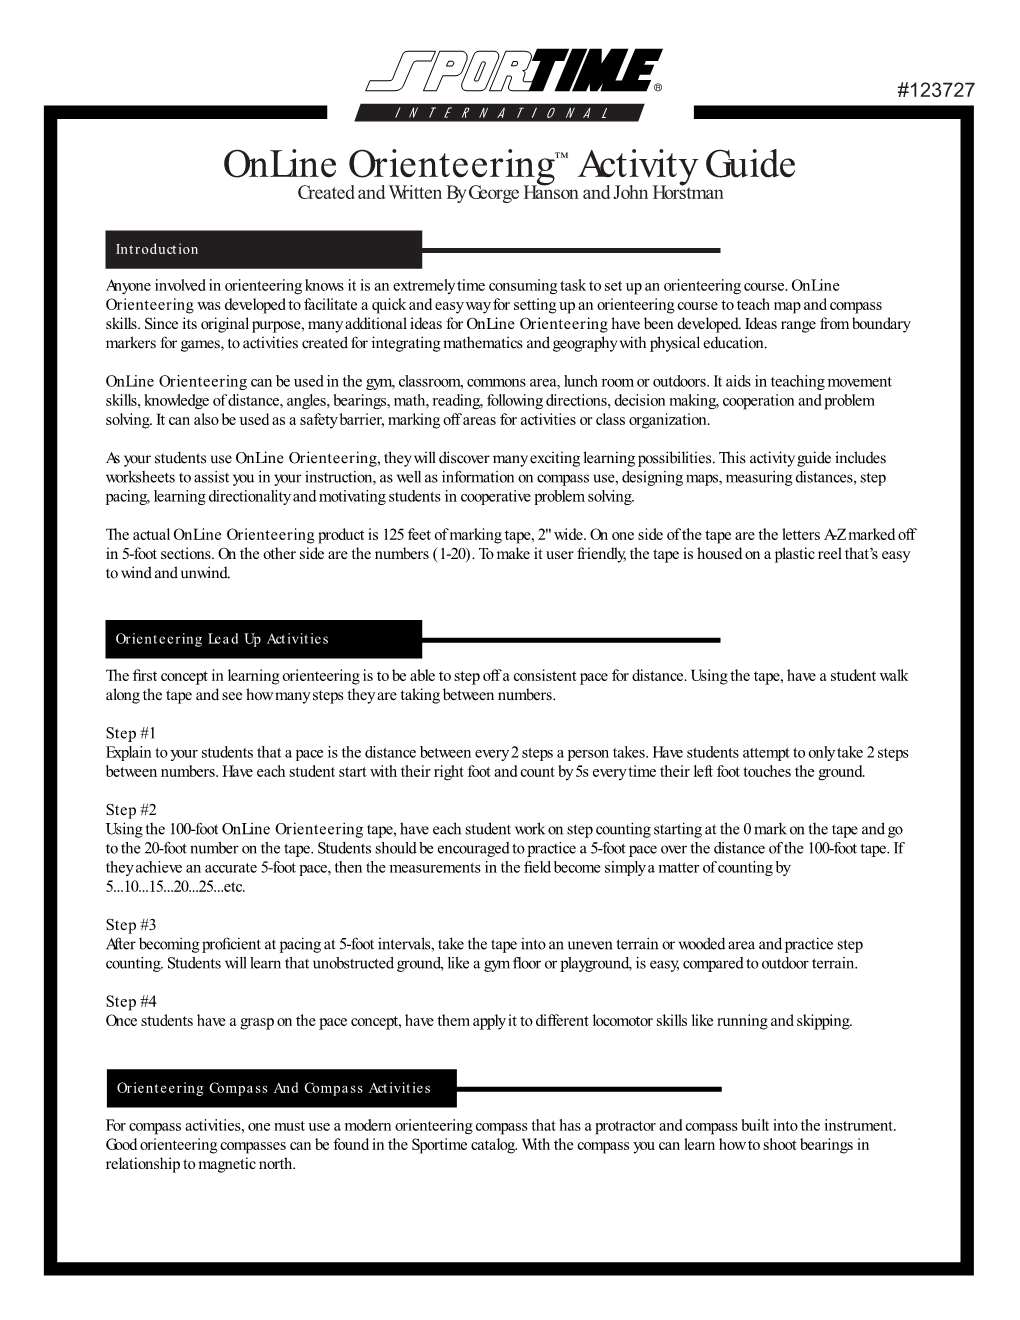 Online Orienteering™ Activity Guide Created and Written by George Hanson and John Horstman